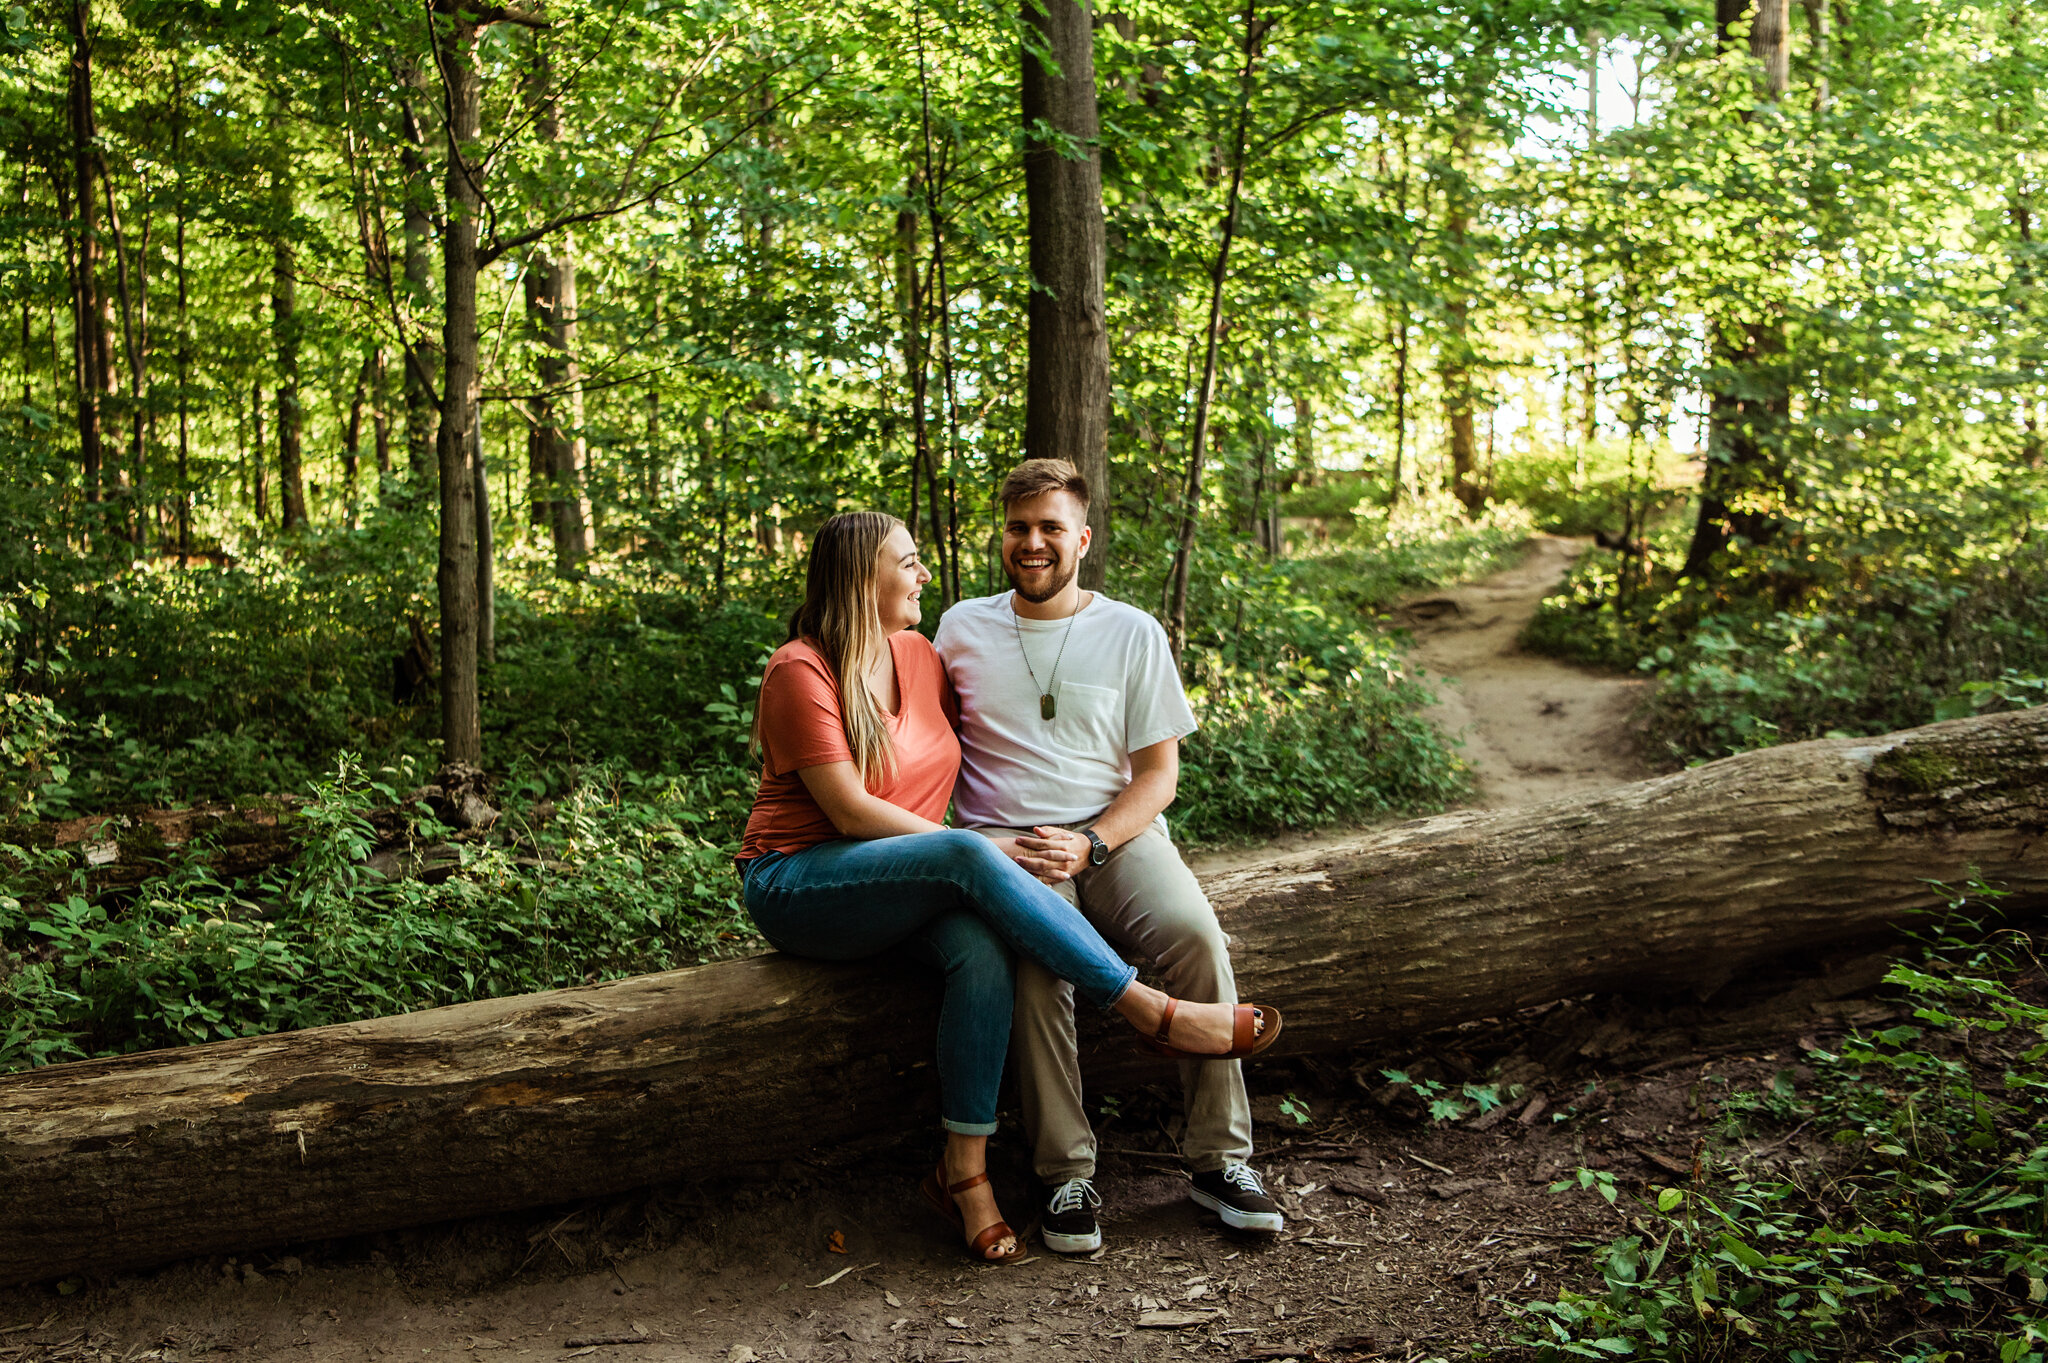 Chimney_Bluffs_State_Park_Rochester_Engagement_Session_JILL_STUDIO_Rochester_NY_Photographer_6781.jpg